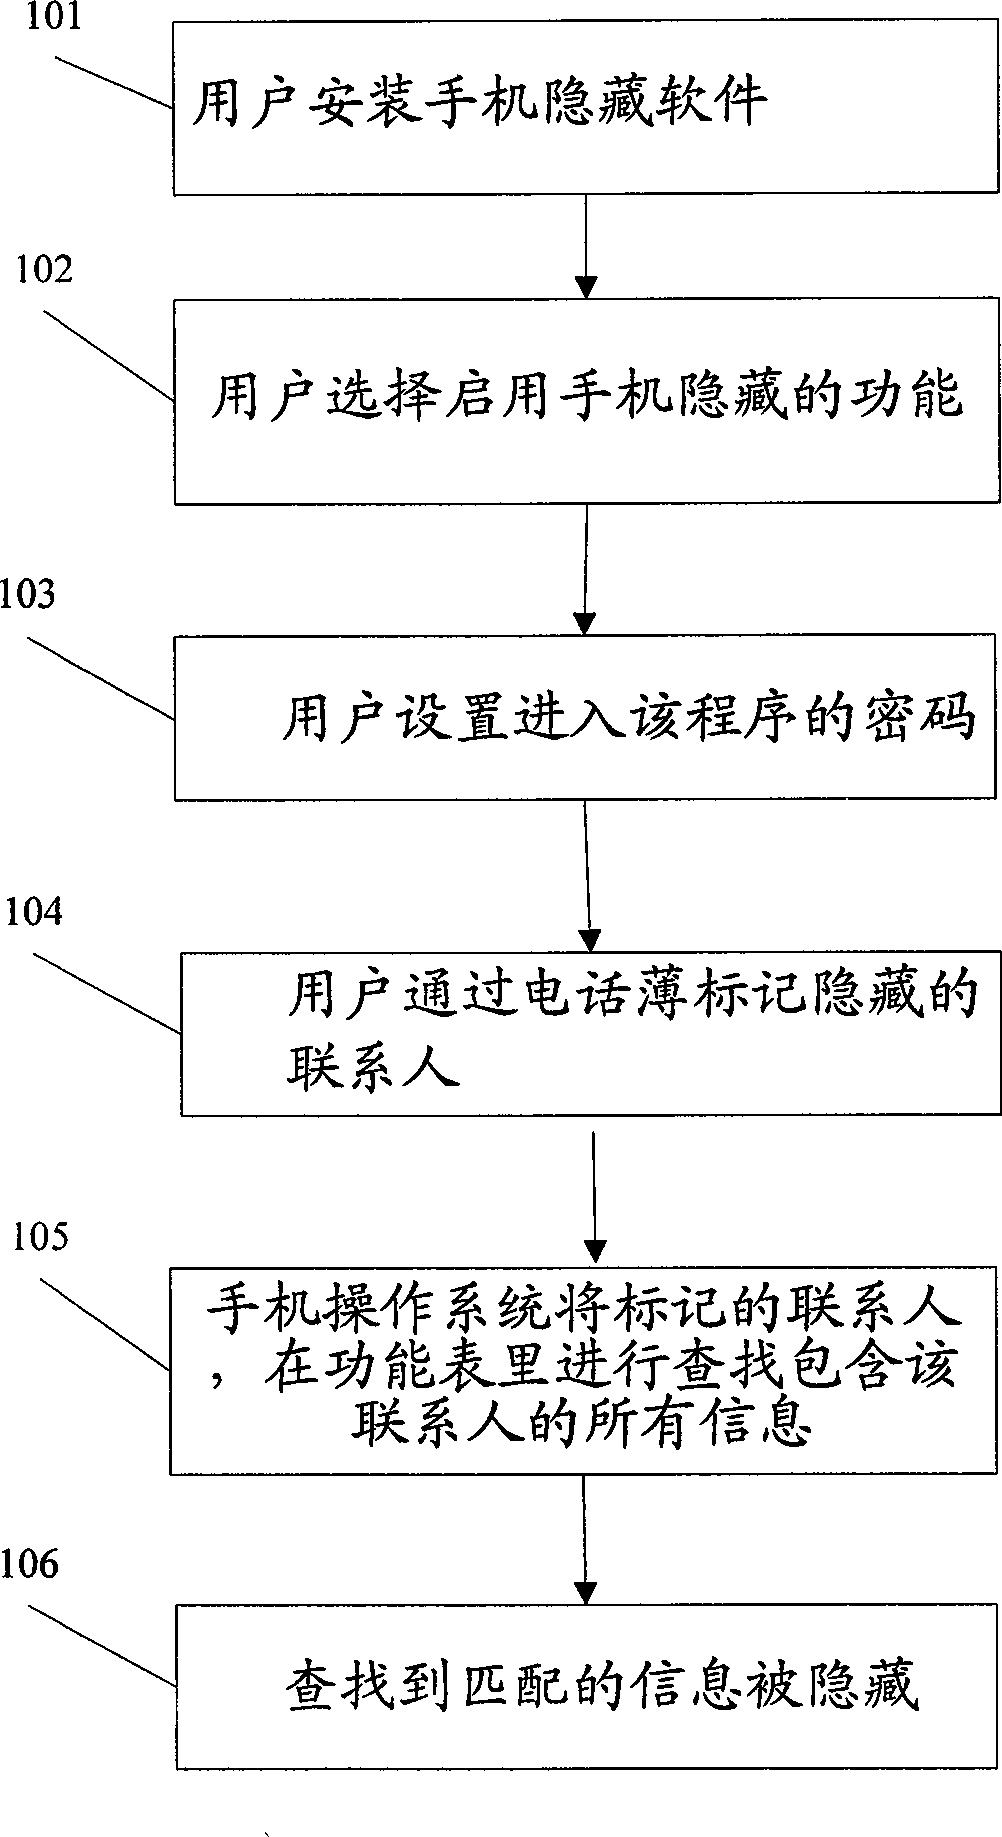 Method for mobile phone information safety protection